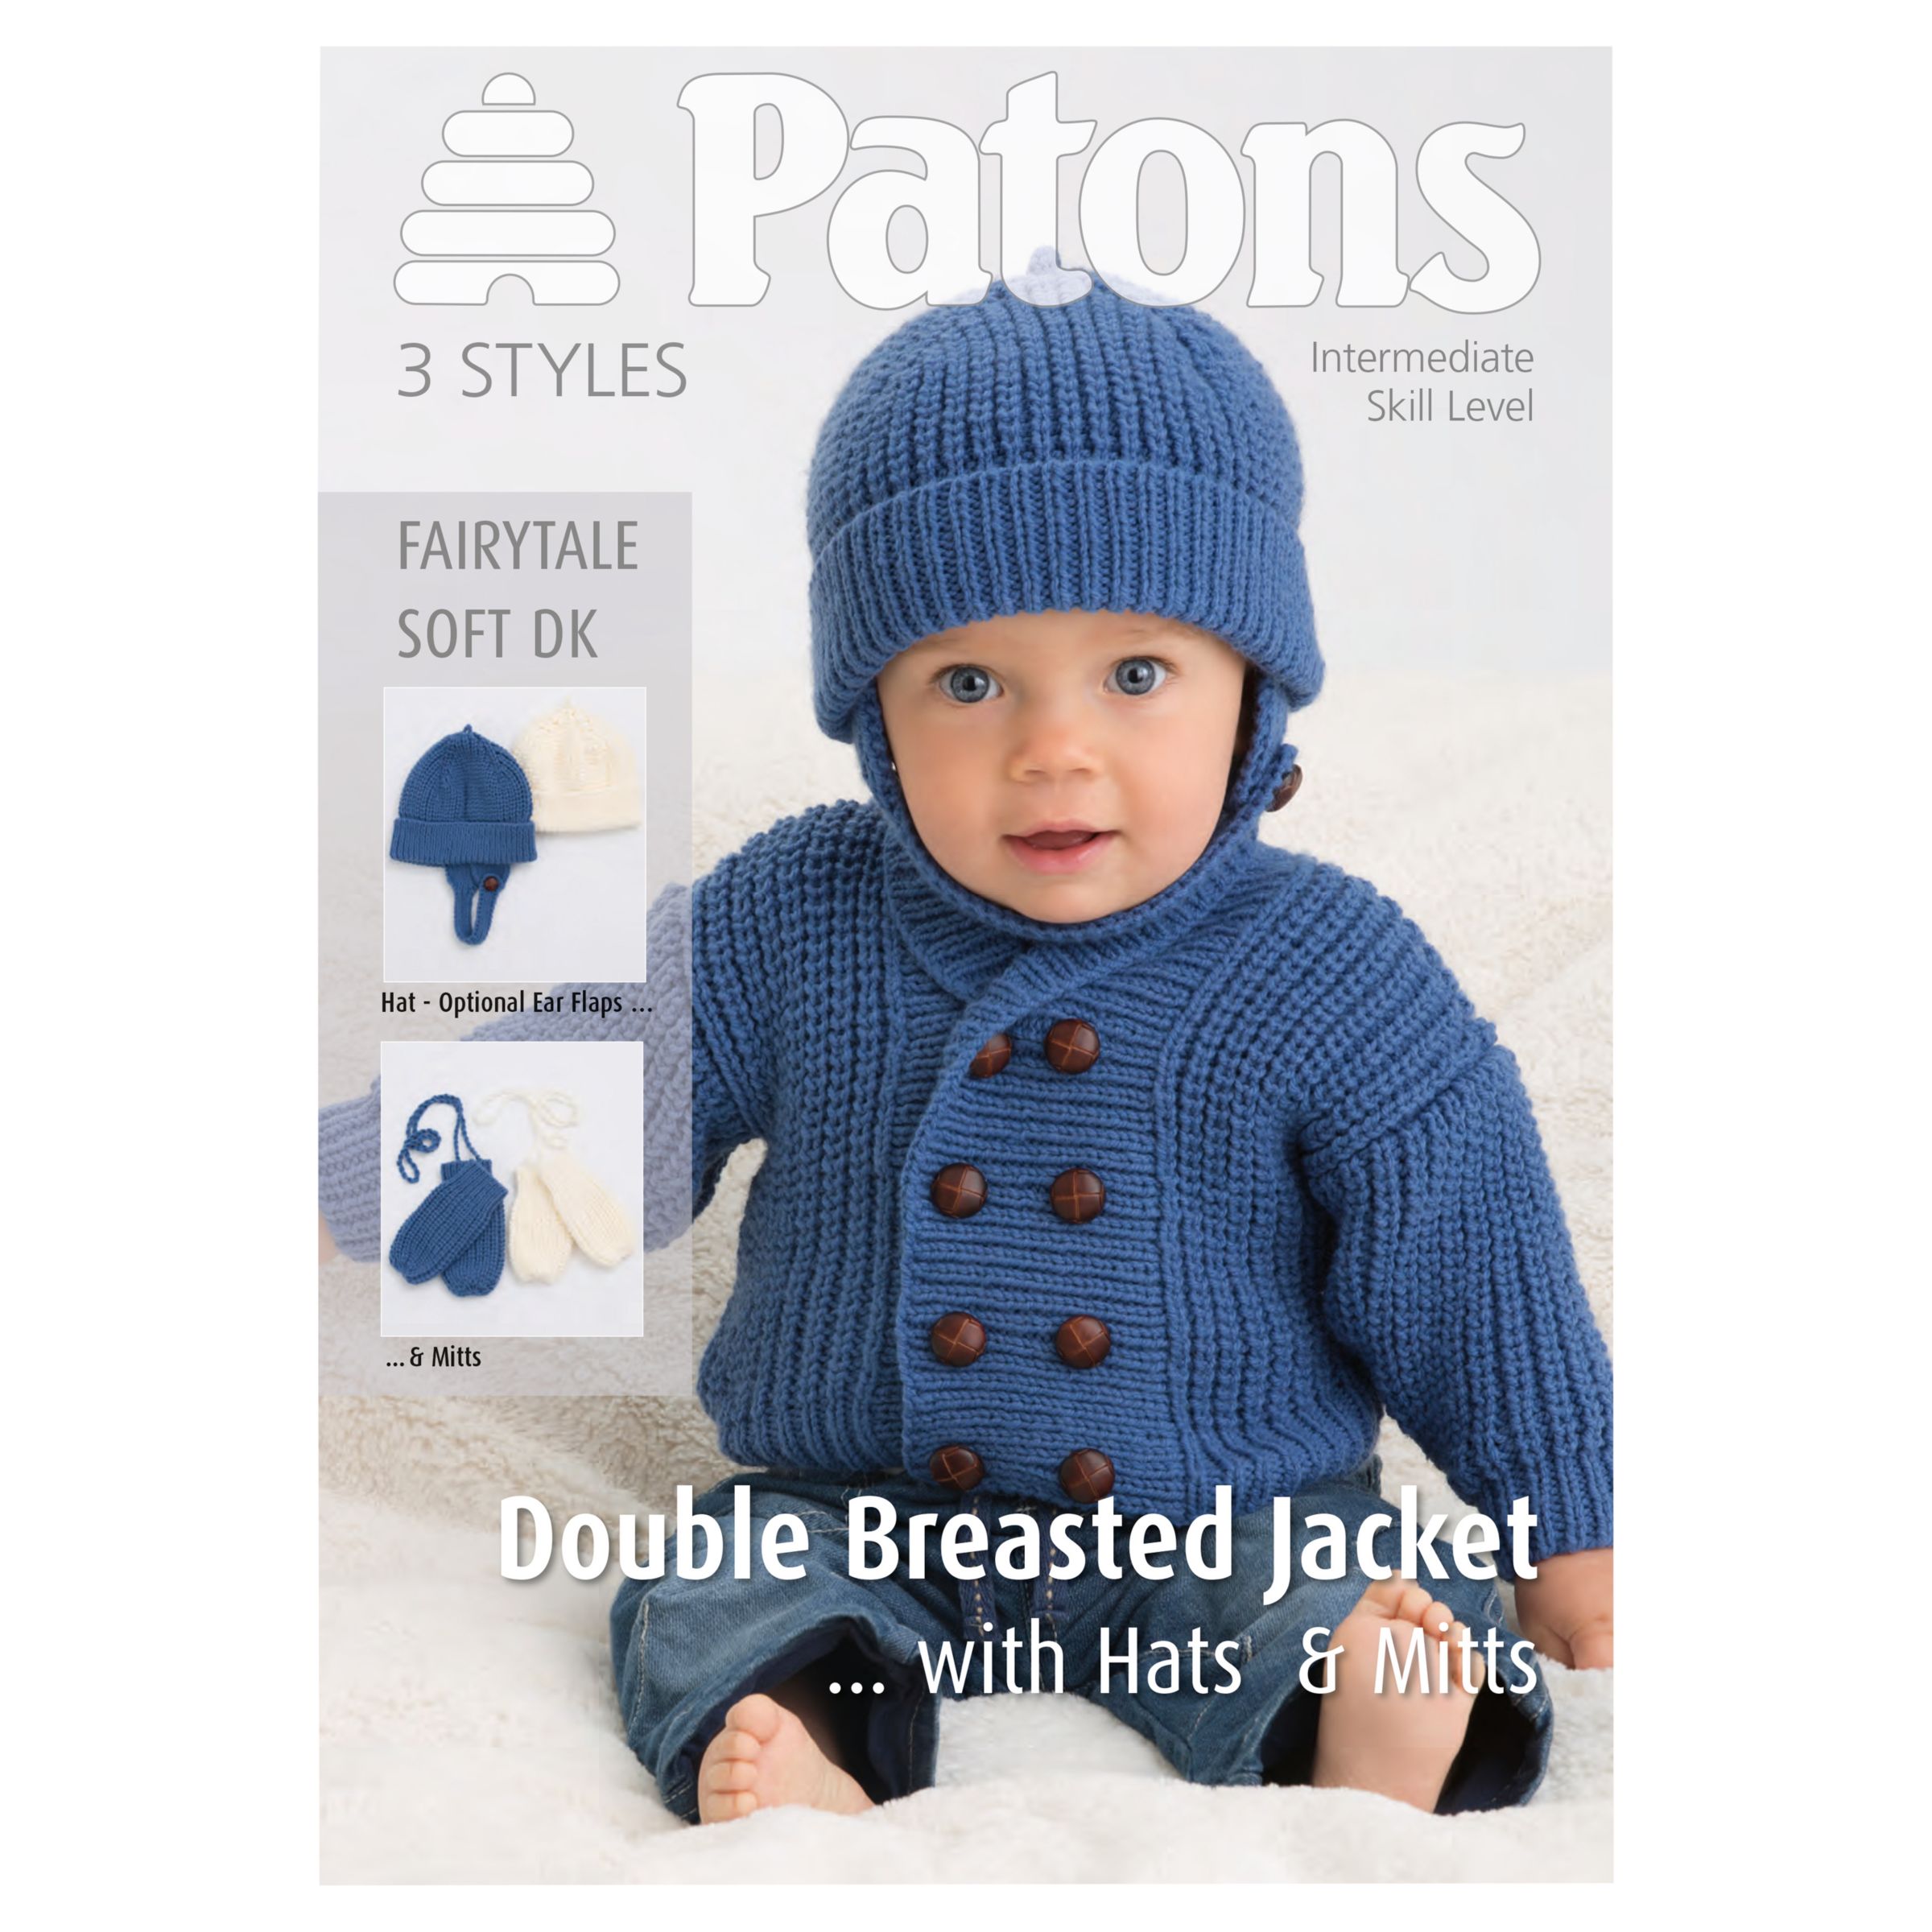 Free double knitting patterns for toddlers